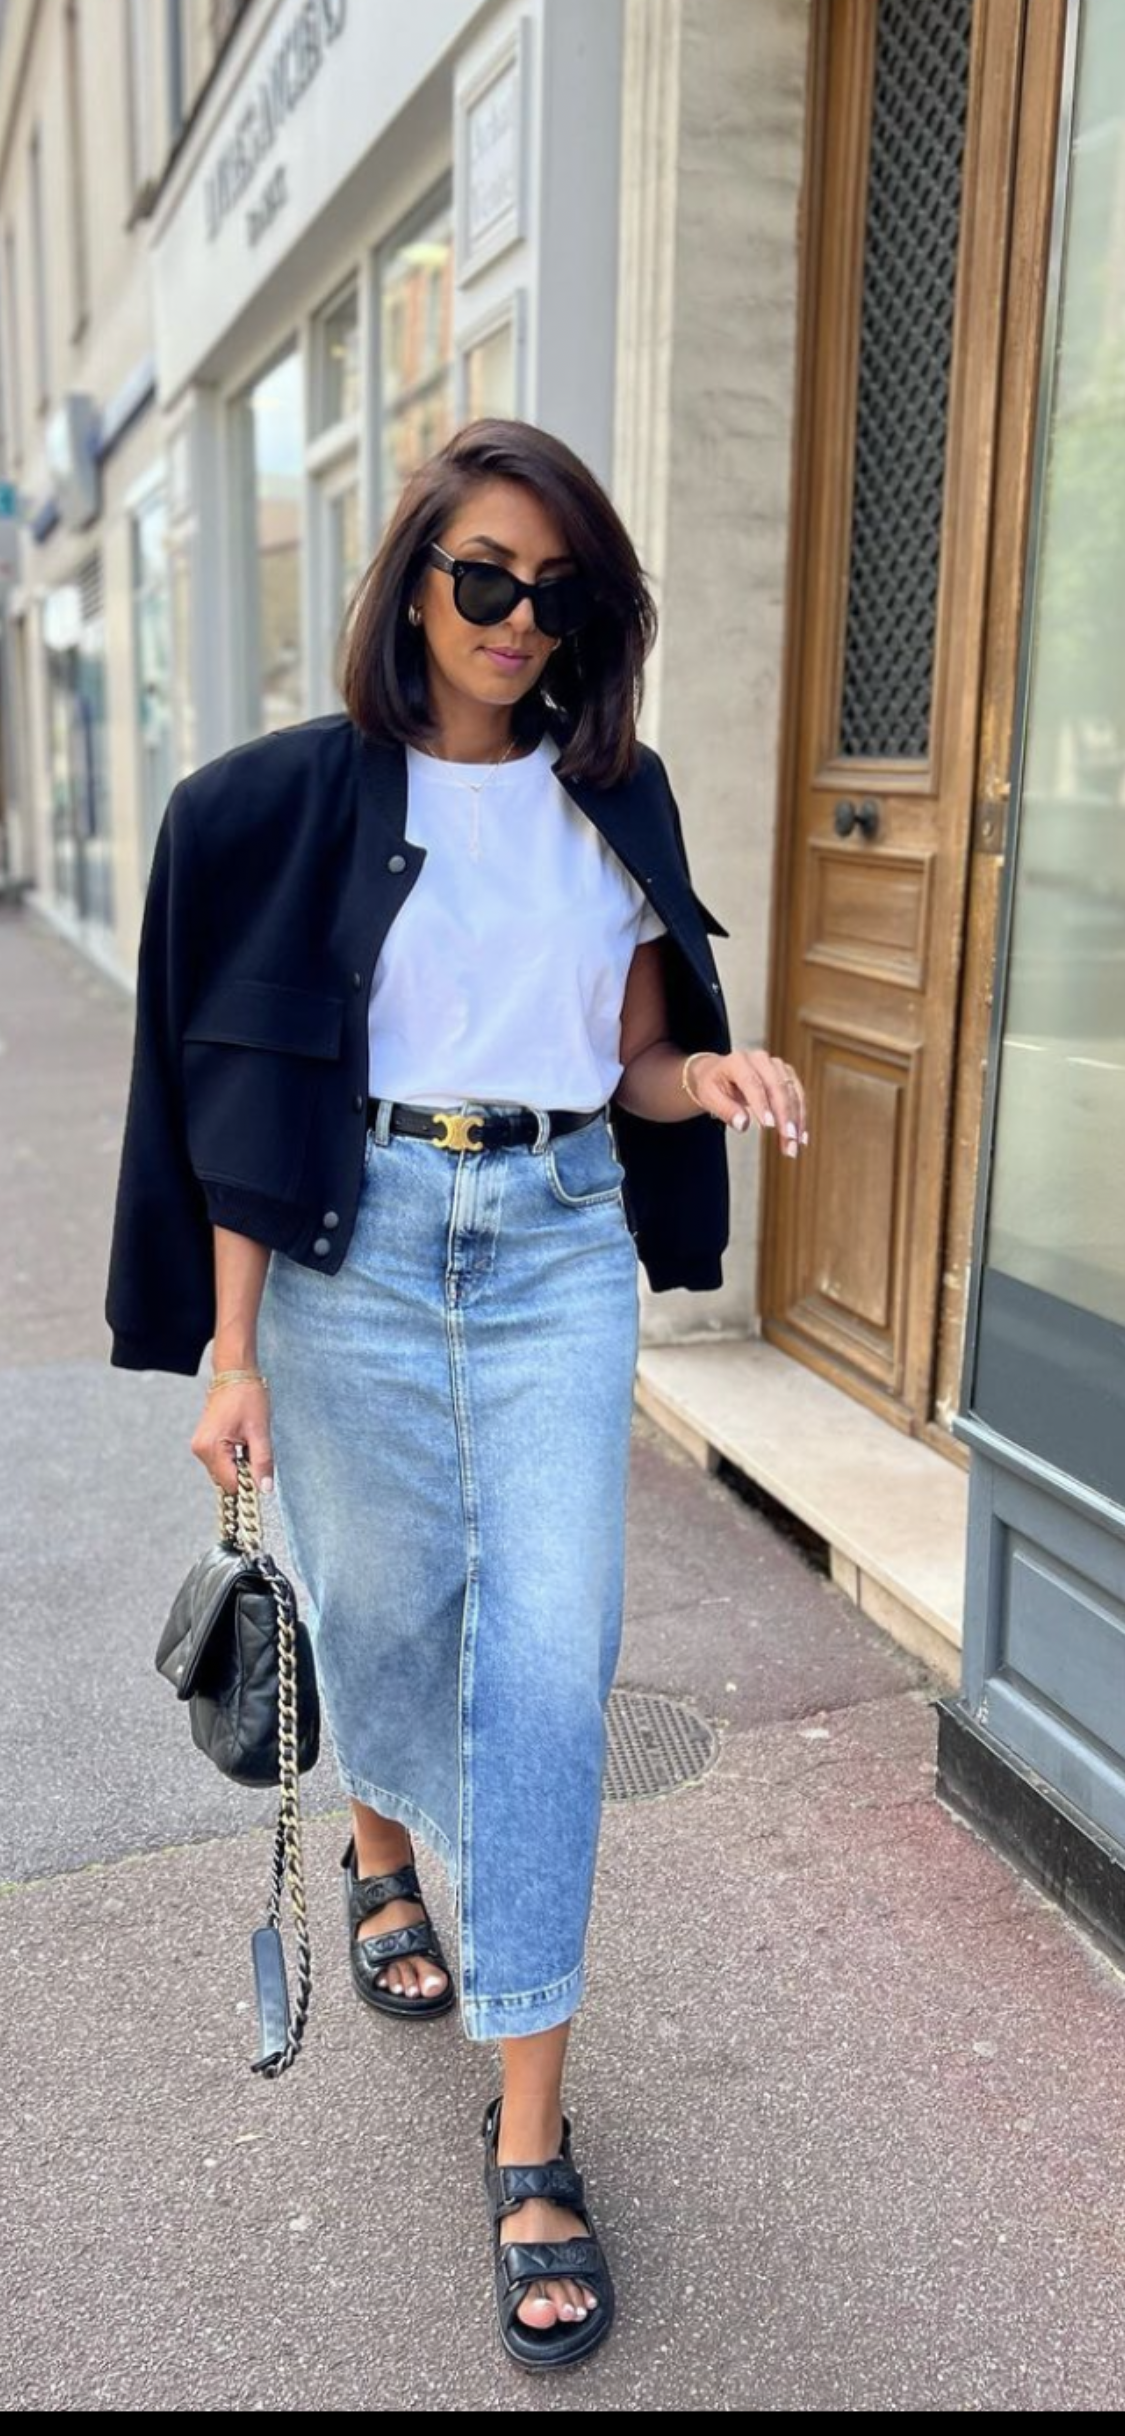 Add denim midi skirts to your fashions to look more elegant